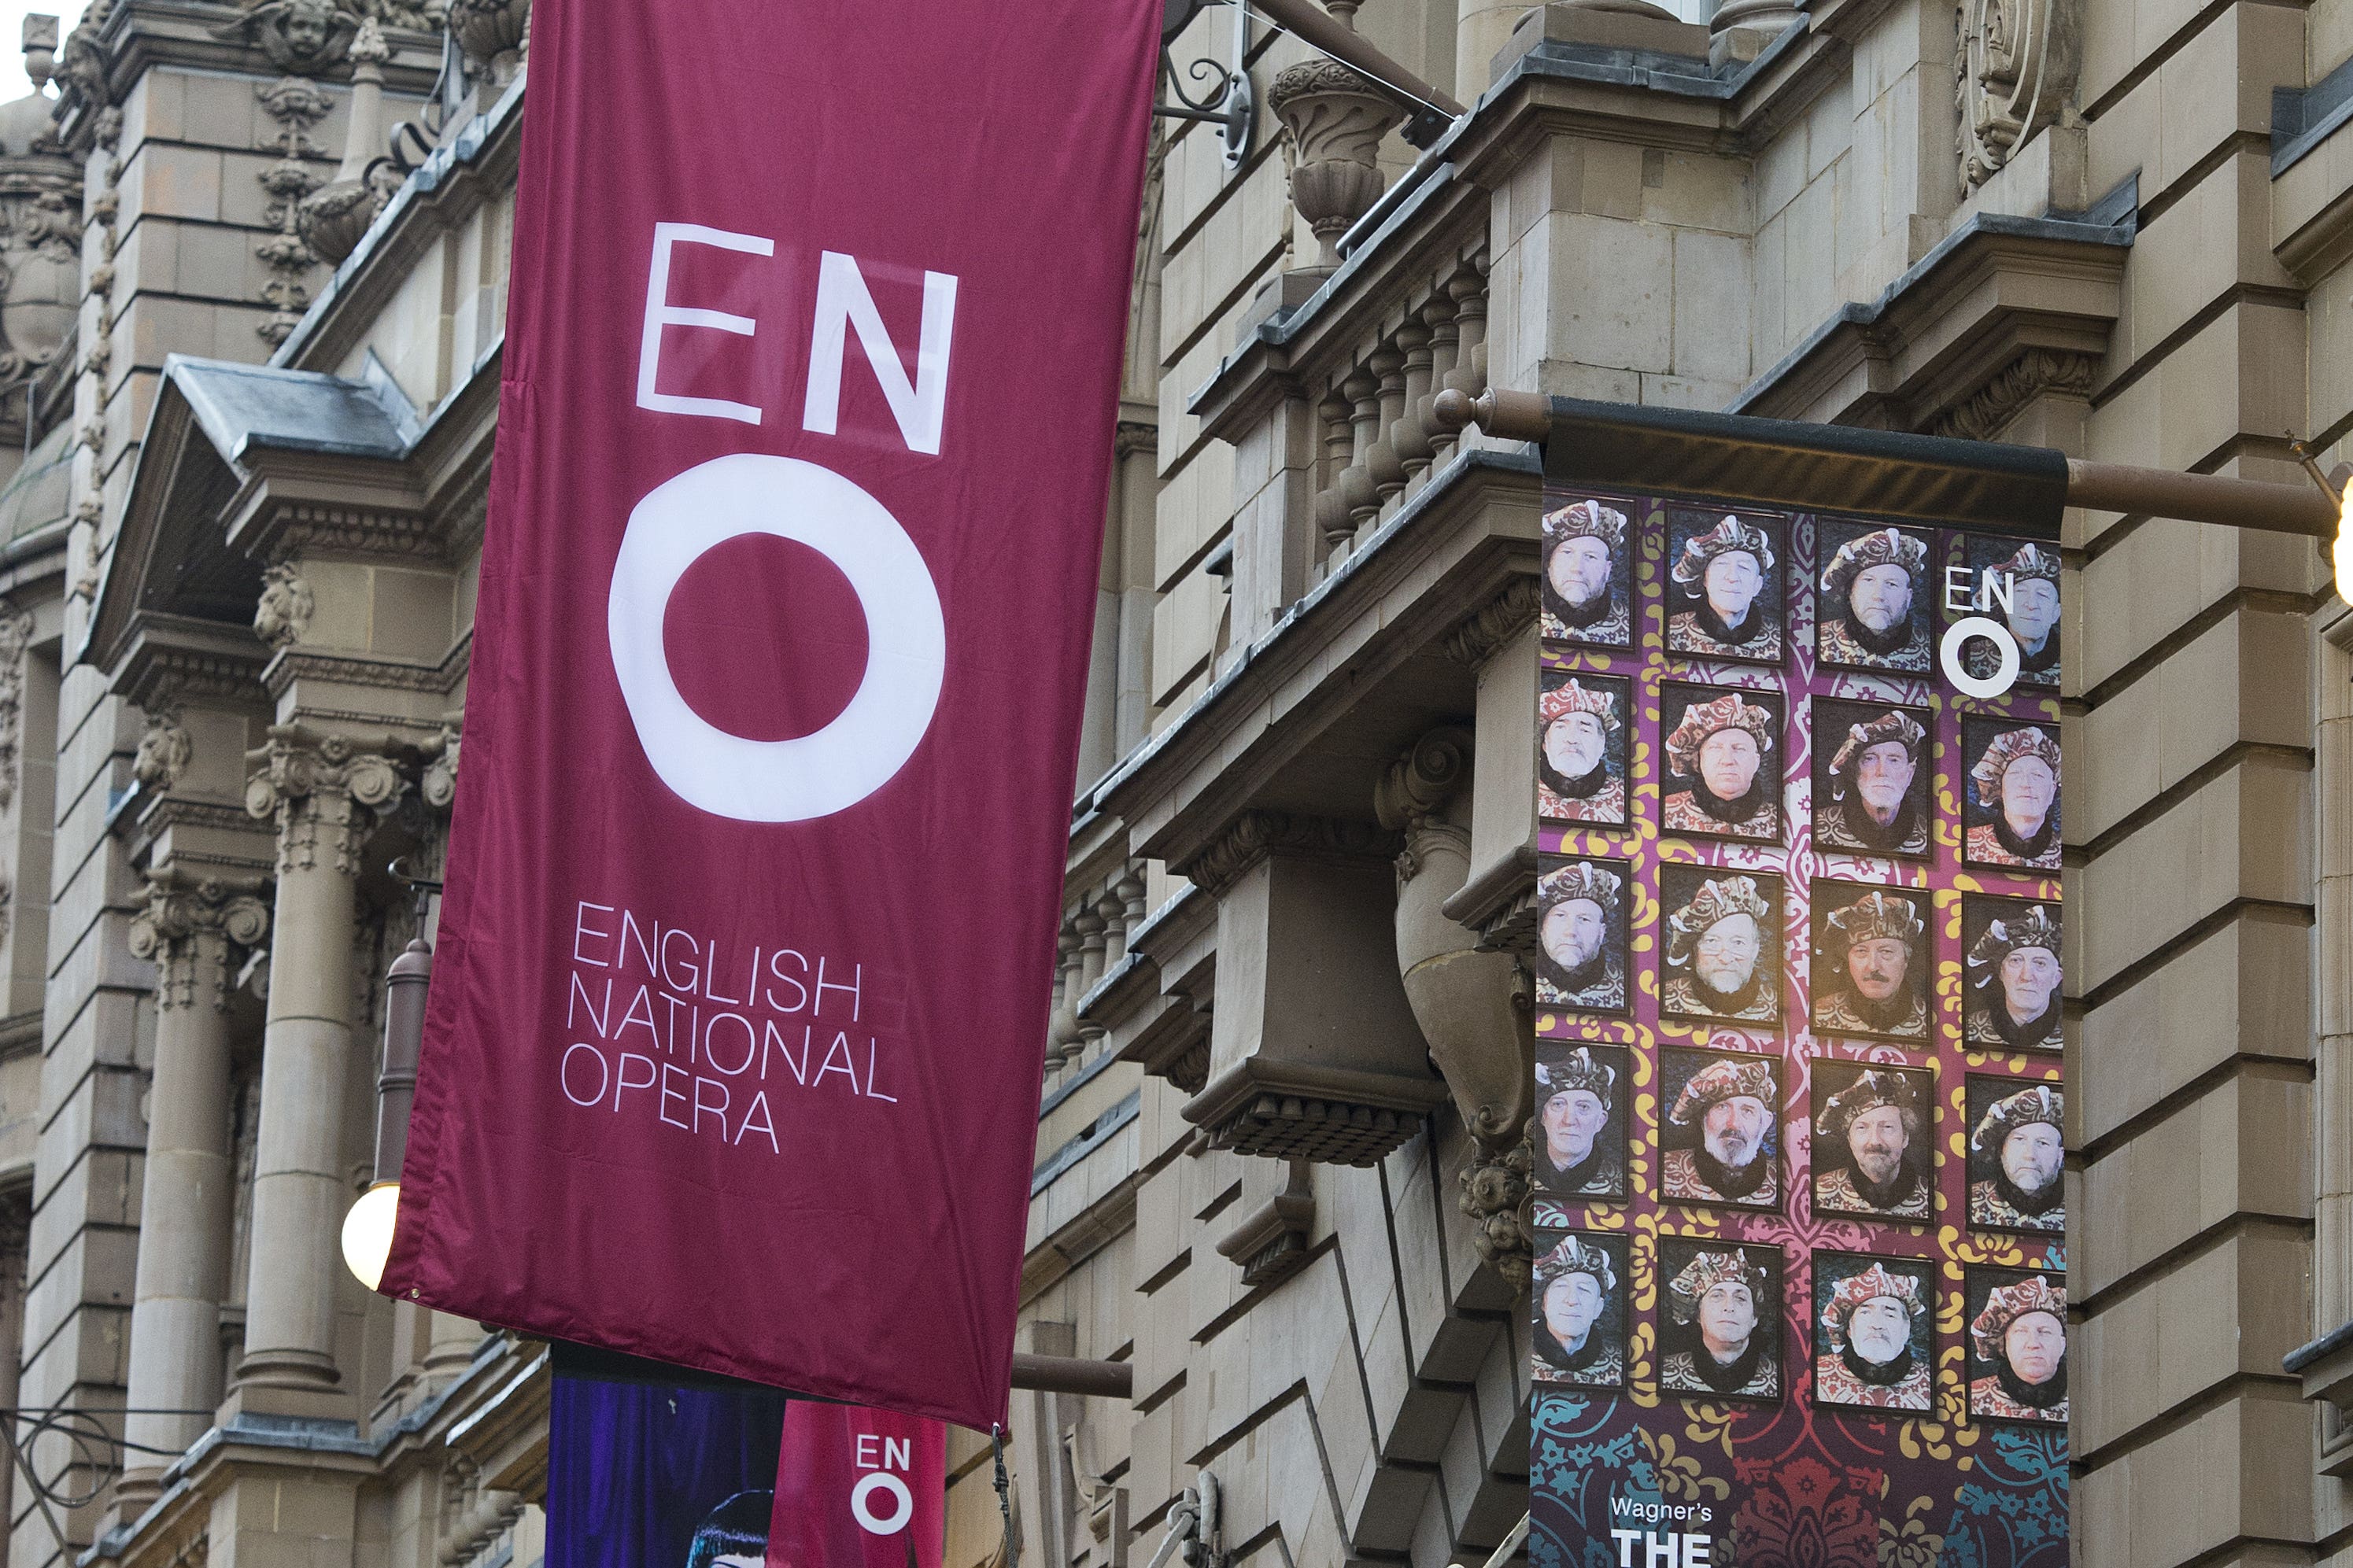 The English National Opera, long a fixture on the London cultural scene, is moving north